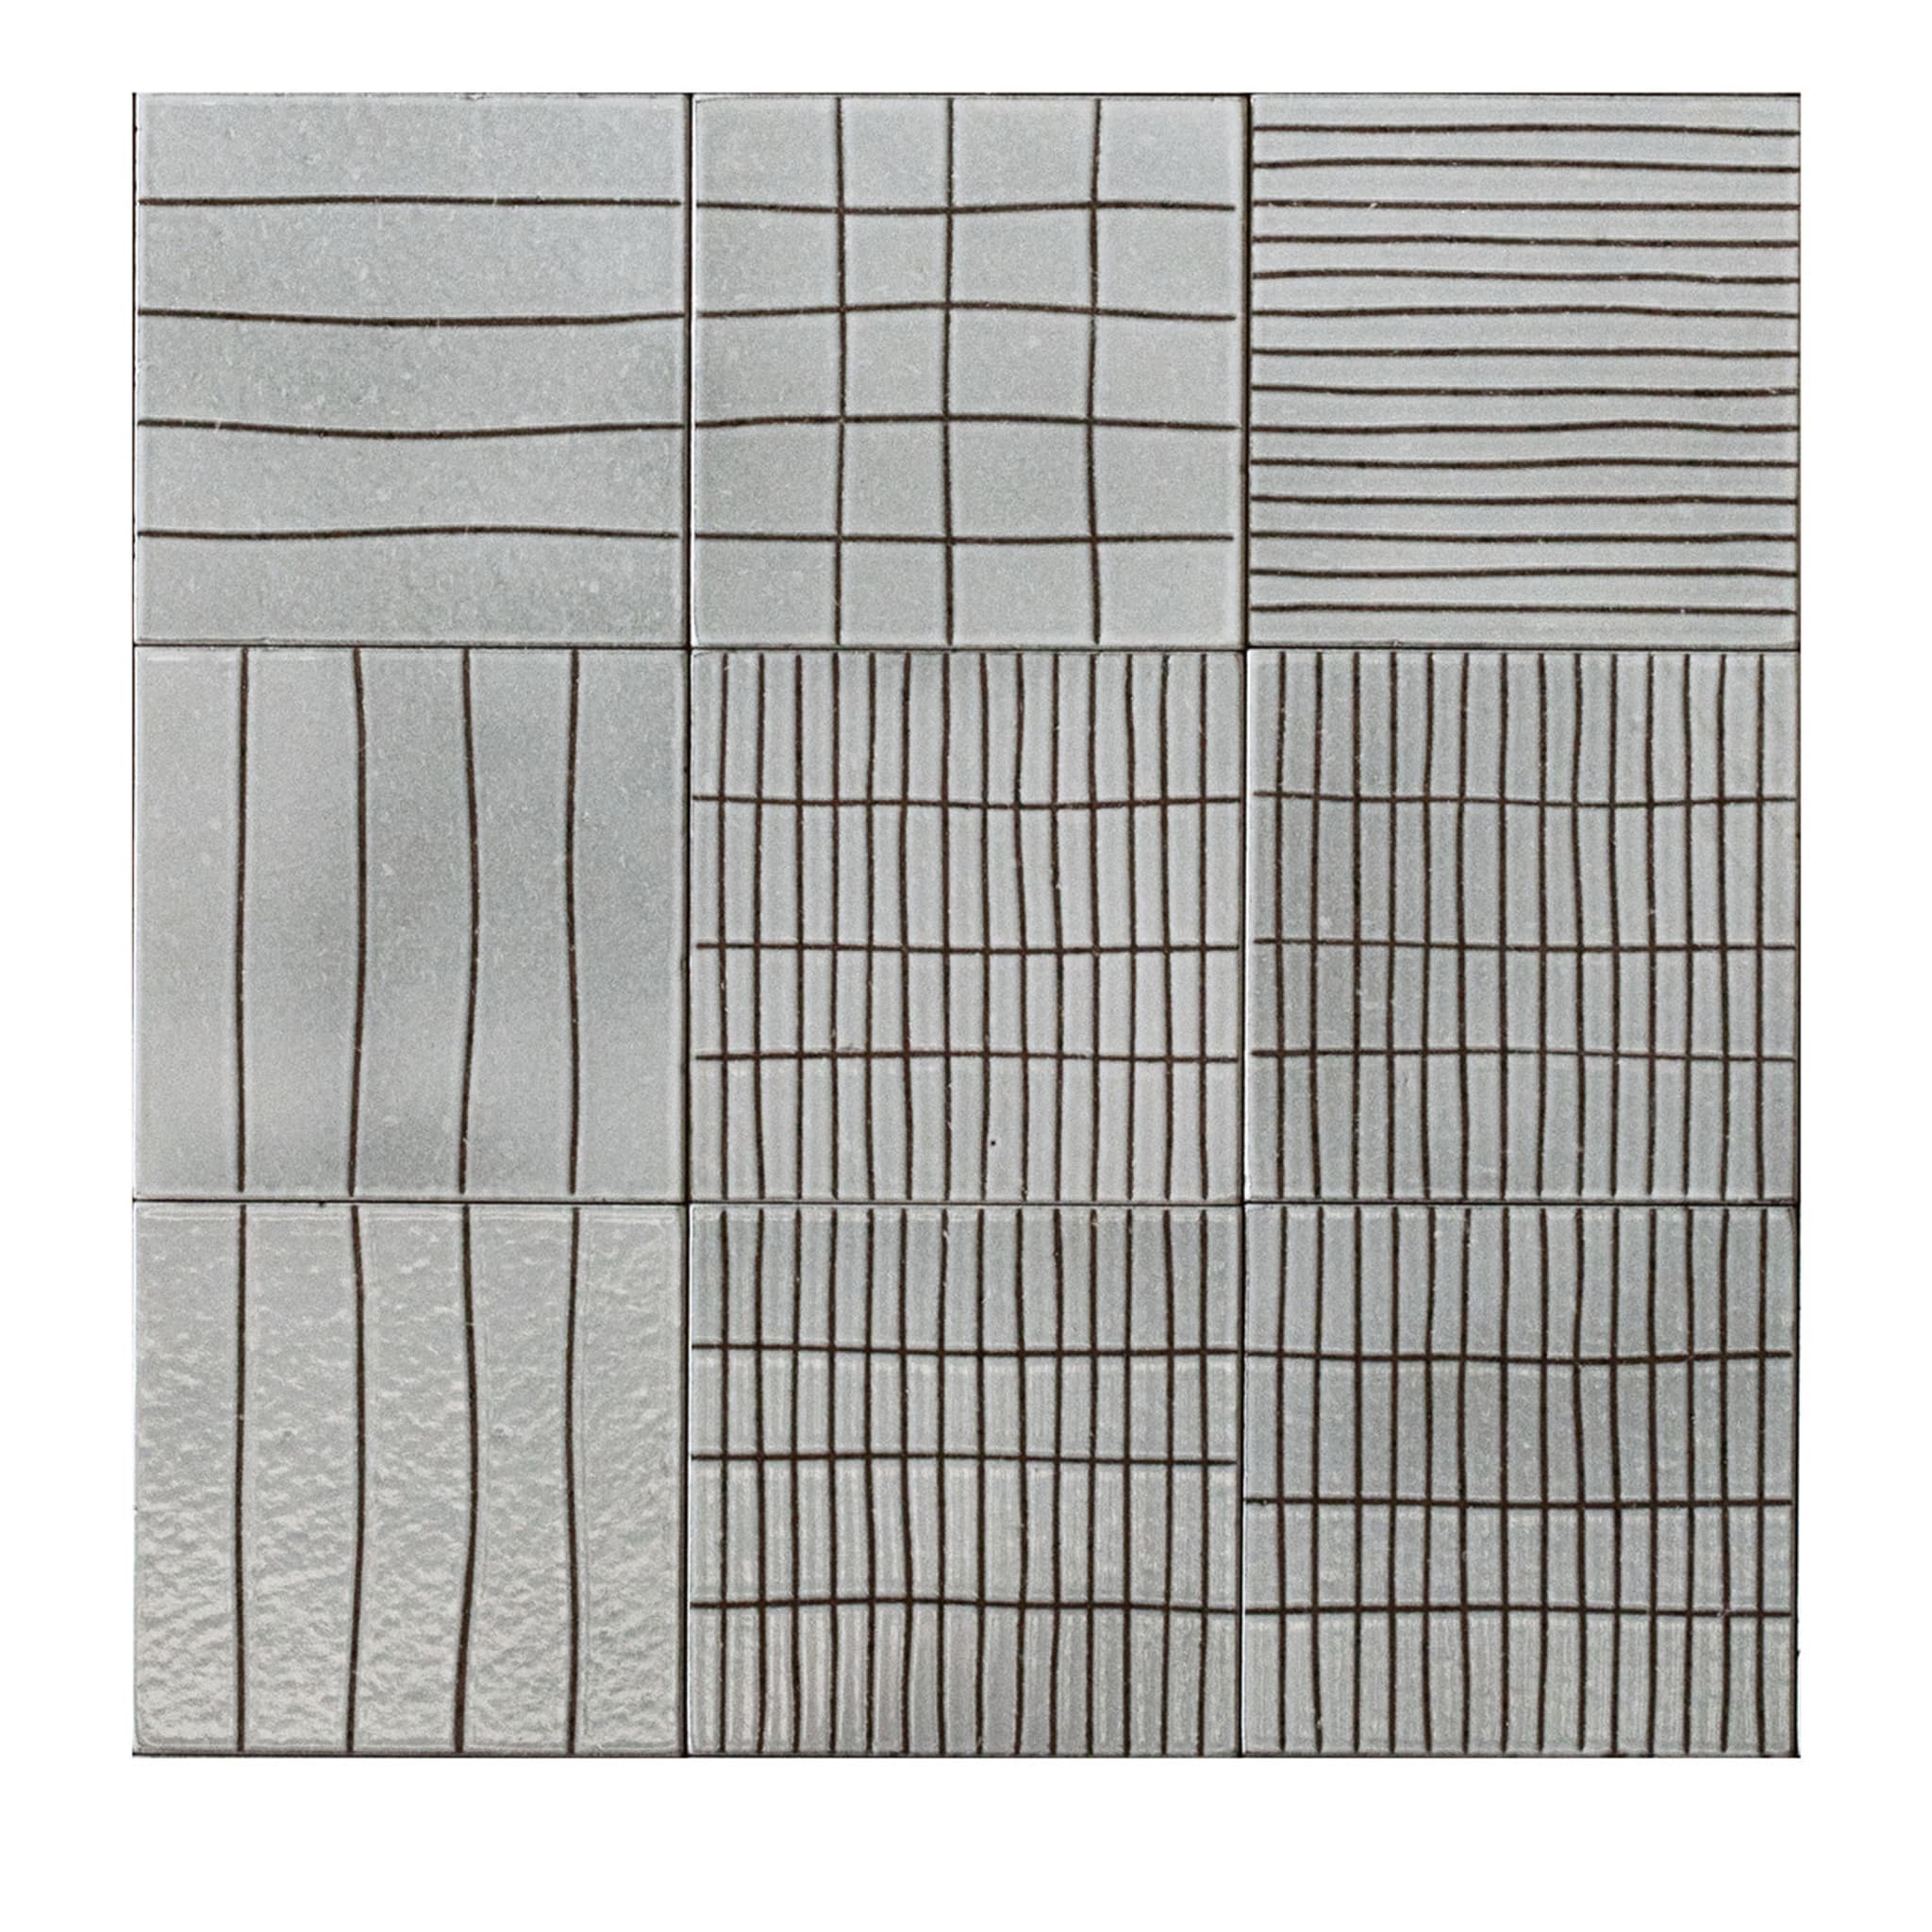 Righe Set of 44 Gray Tiles by Margherita Rui - Main view